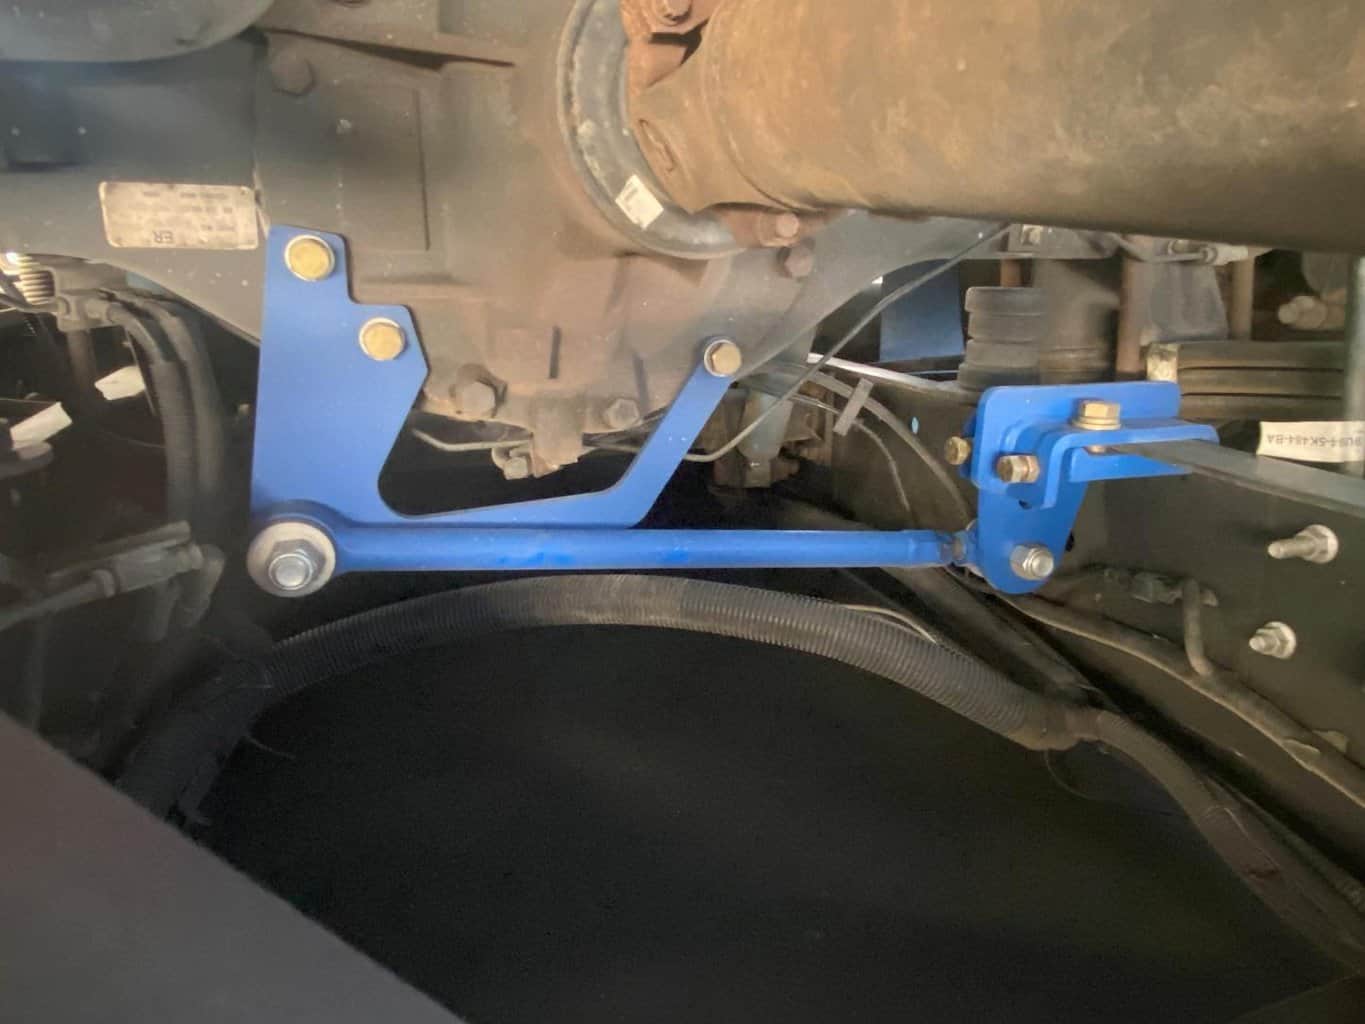 A blue metal arm on a vehicle

Description automatically generated